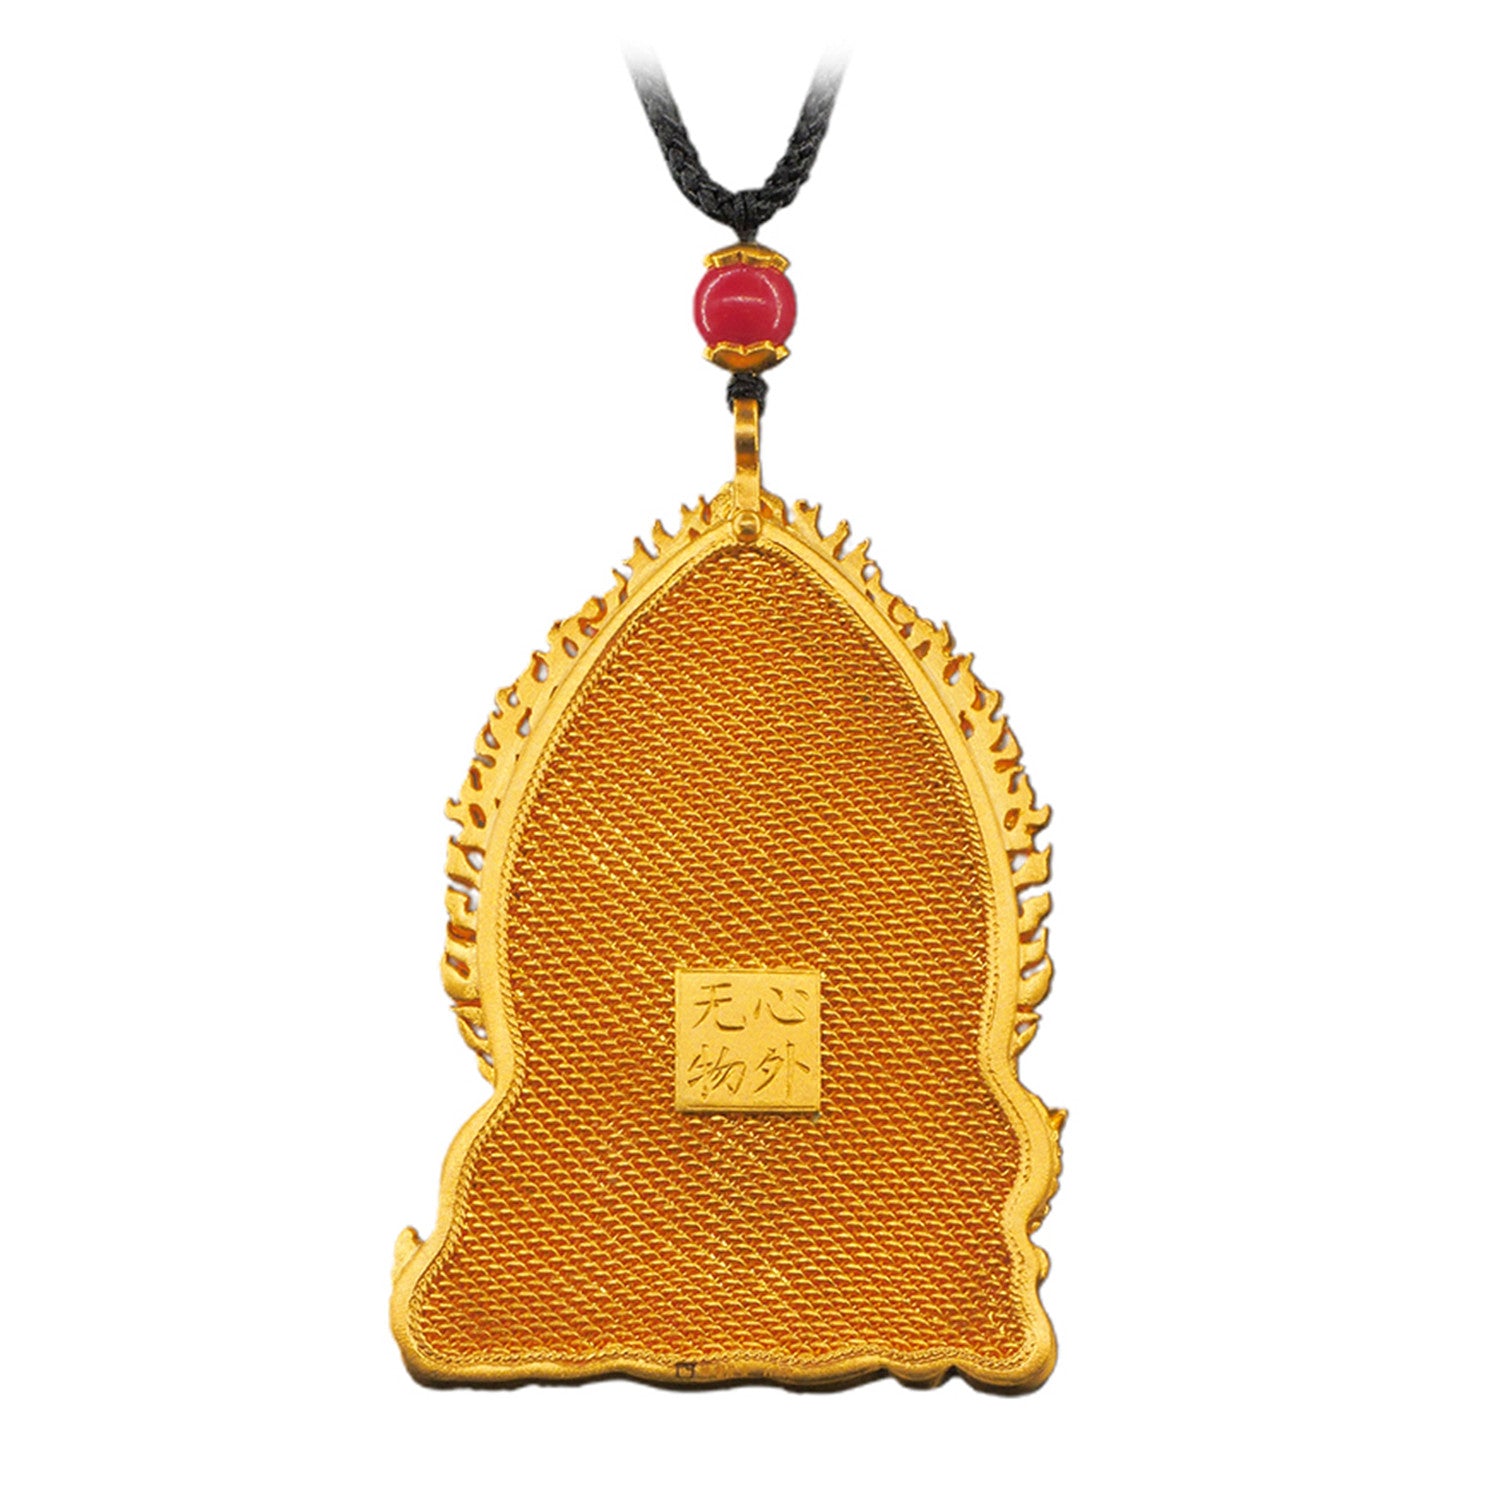 EVECOCO Full Gold Buddha Pendants For Male,Hand Forging,Fine Carving75g